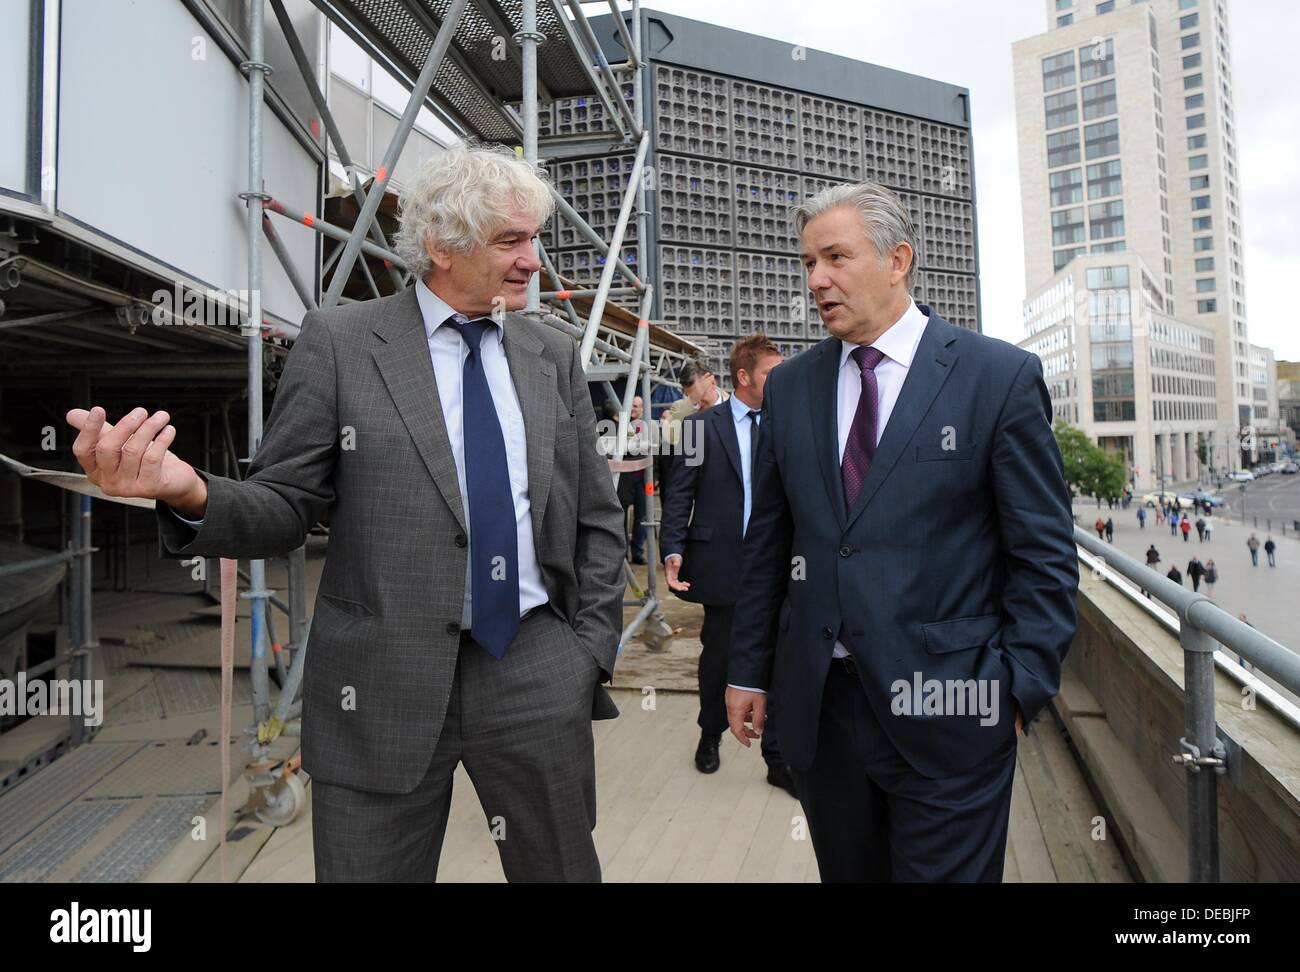 Berlin, Germany. 15th Sep, 2013. Architect Gerhard Schlotter (l) and Mayor of Berlin, Klaus Wowereit, inspect the progress of the construction works on the Kaiser Wilhelm Memorial Church after visiting a service in the church in Berlin, Germany, 15 September 2013. The church tower has been refurbished and the restored chime rang again at twelve noon. Photo: BRITTA PEDERSEN/dpa/Alamy Live News Stock Photo